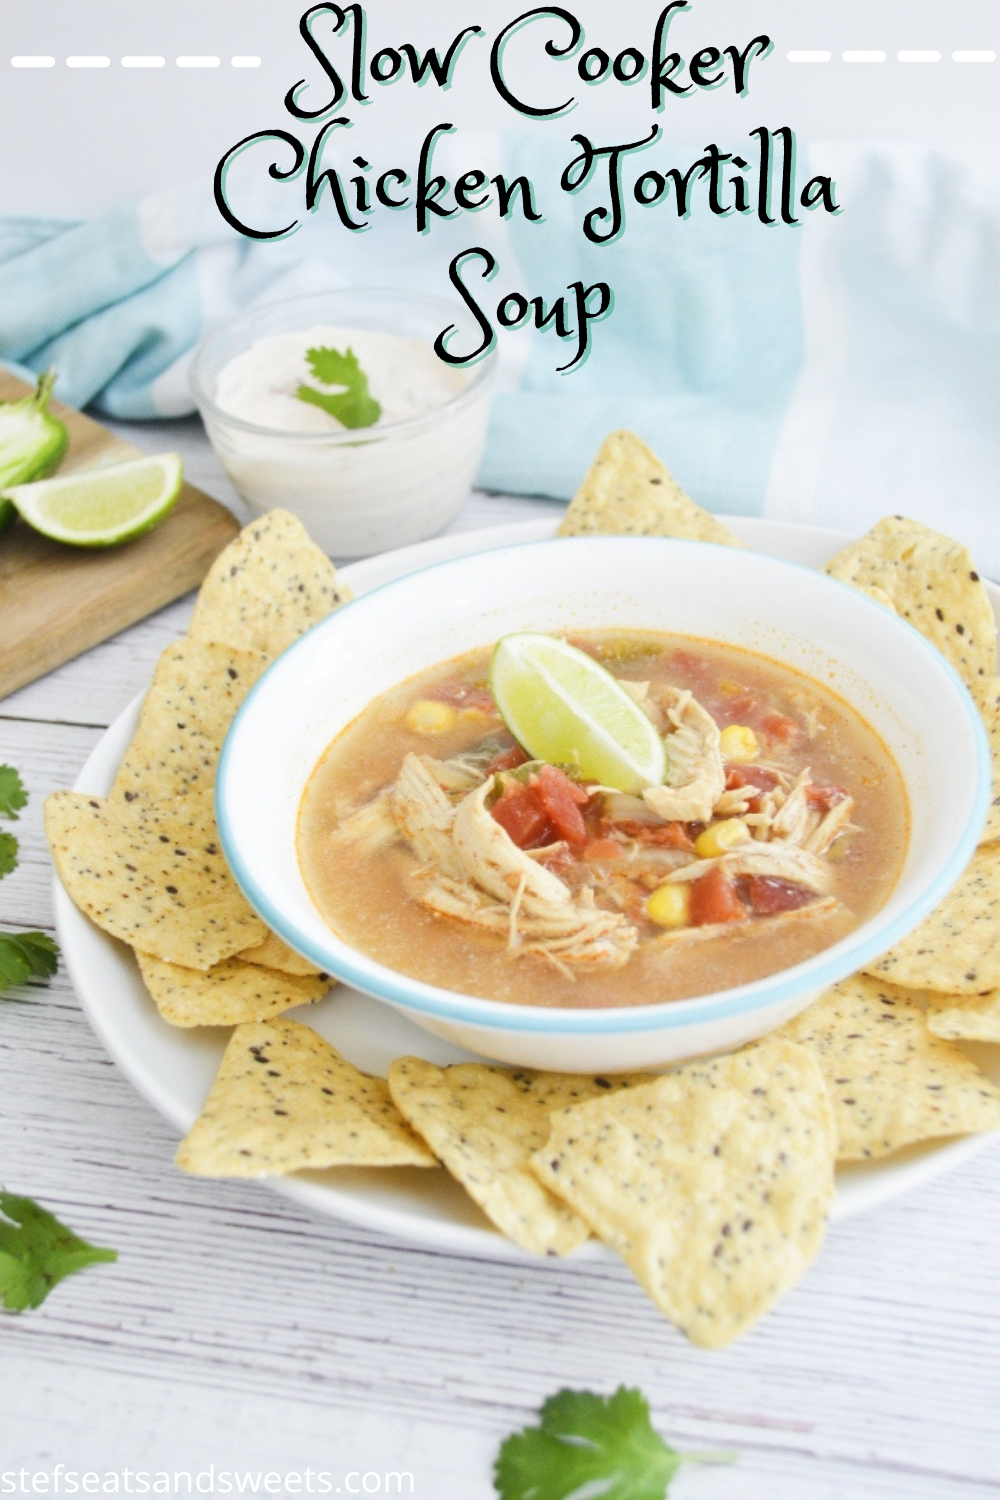 Spicy Slow Cooker Chicken Tortilla Soup - Stef's Eats and Sweets